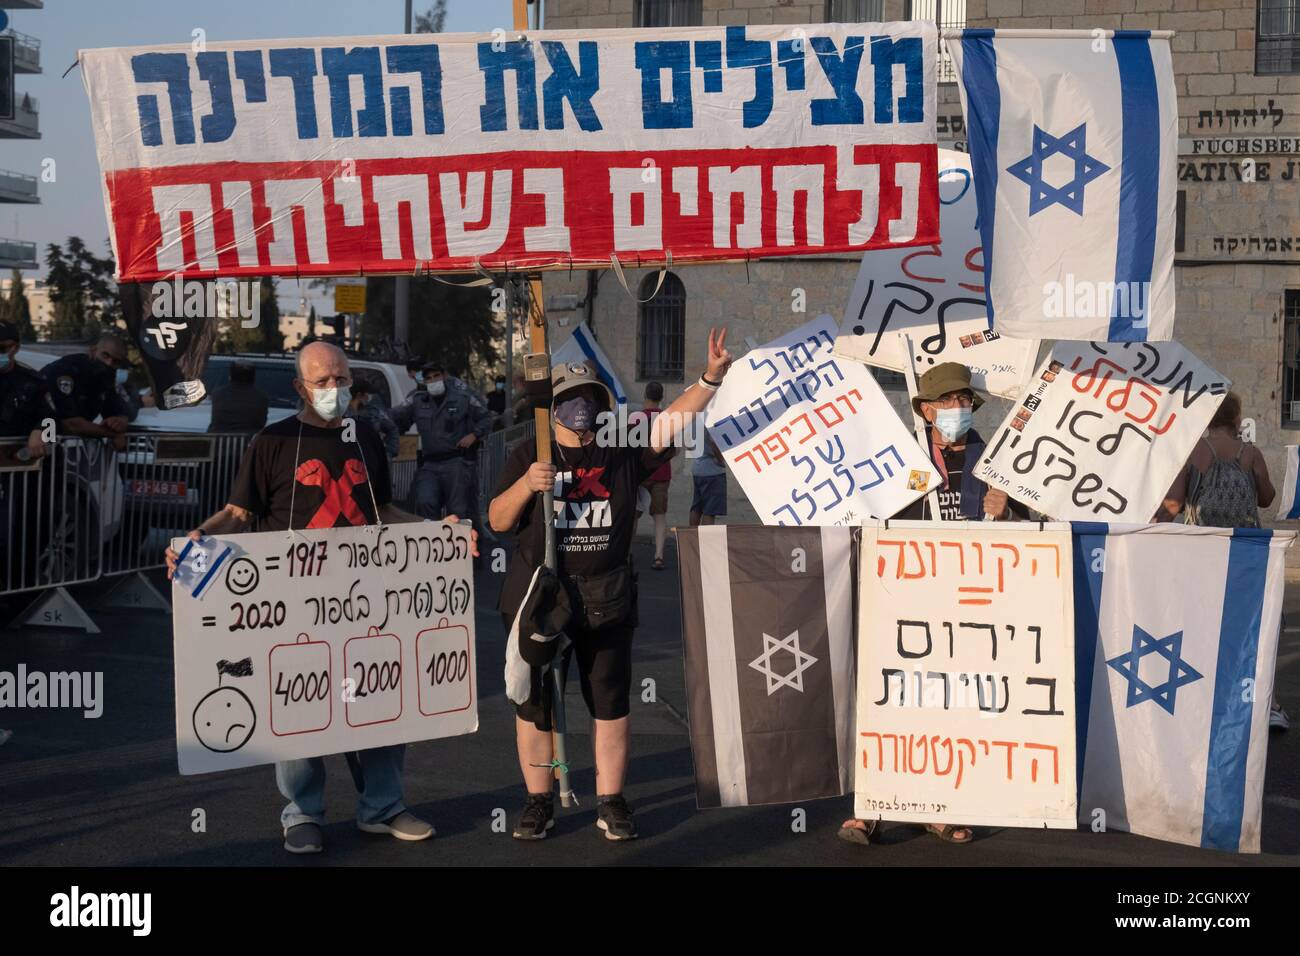 JERUSALEM, ISRAEL - SEPTEMBER 11: Protesters hold placards during a demonstration near prime minister's official residence as part of ongoing demonstrations for the 12th consecutive week against Prime Minister Benjamin Netanyahu over his indictment on corruption charges and handling of the coronavirus pandemic on September 11, 2020 in Jerusalem, Israel. A wave of anti-Netanyahu protests has swept Israel over the summer, with the largest weekly demonstration taking place every weekend in Jerusalem. Stock Photo